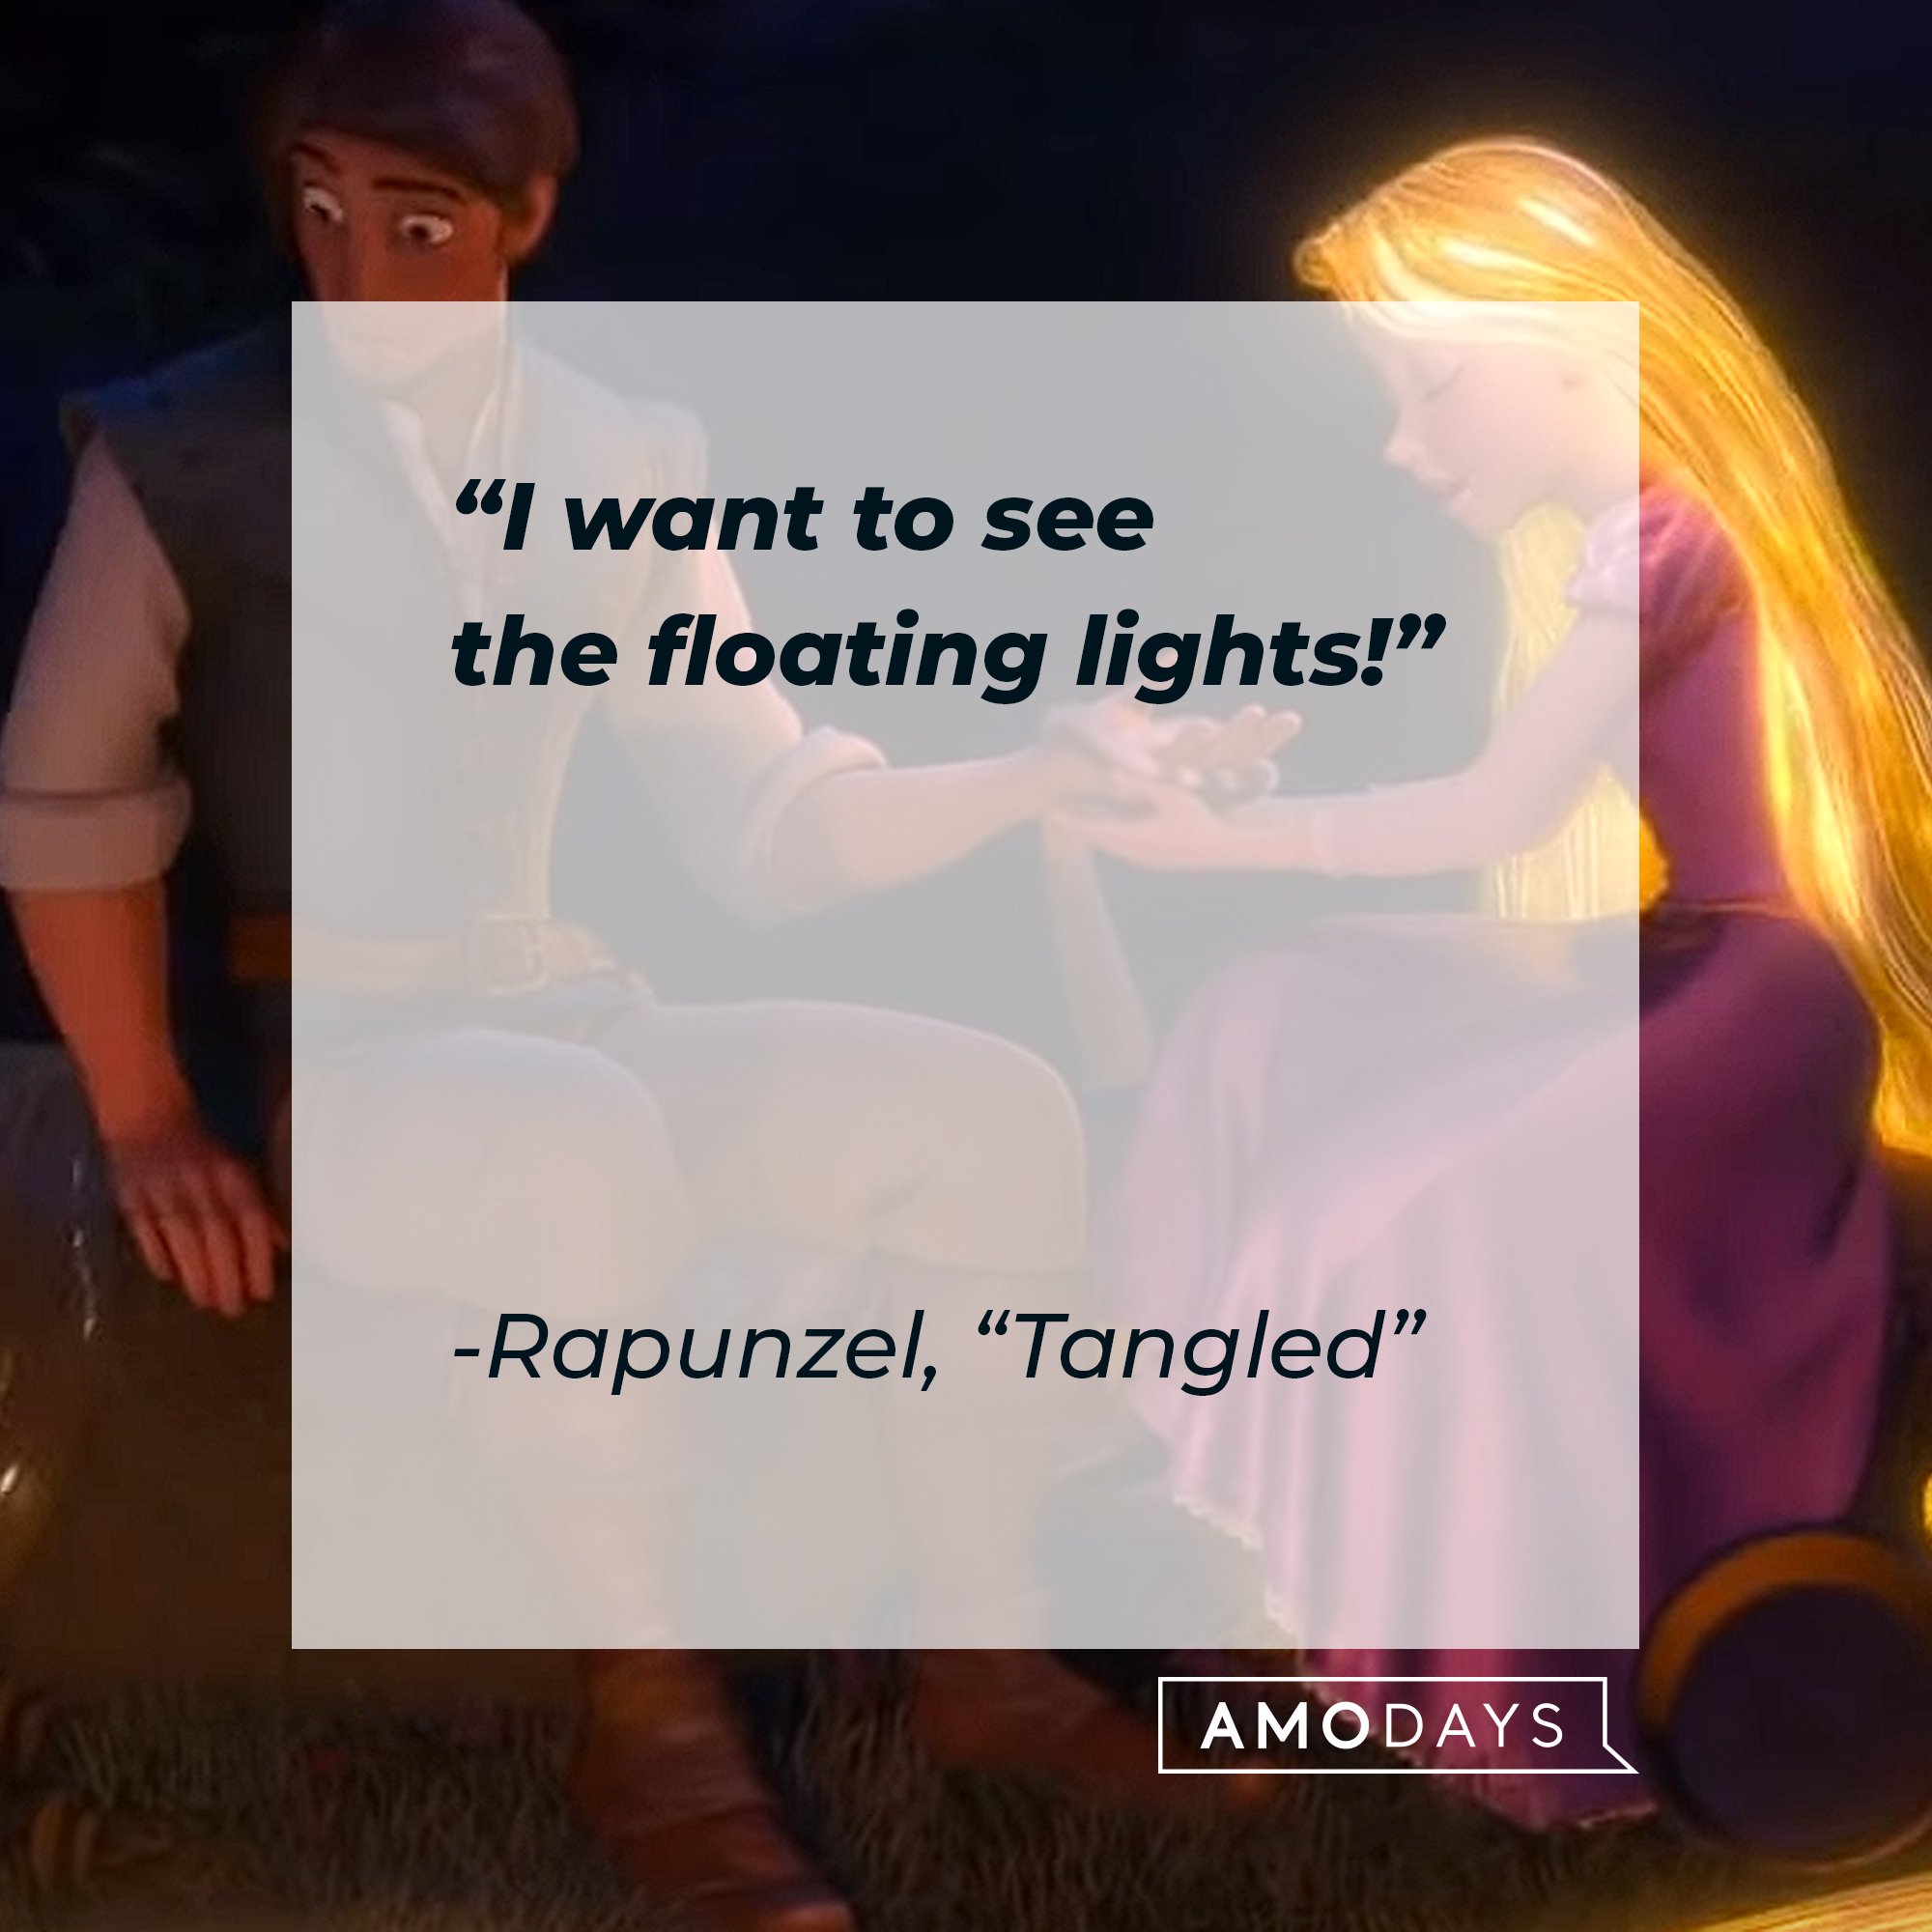 Rapunzel's "Tangled" quote: "I want to see the floating lights!" | Image: AmoDays